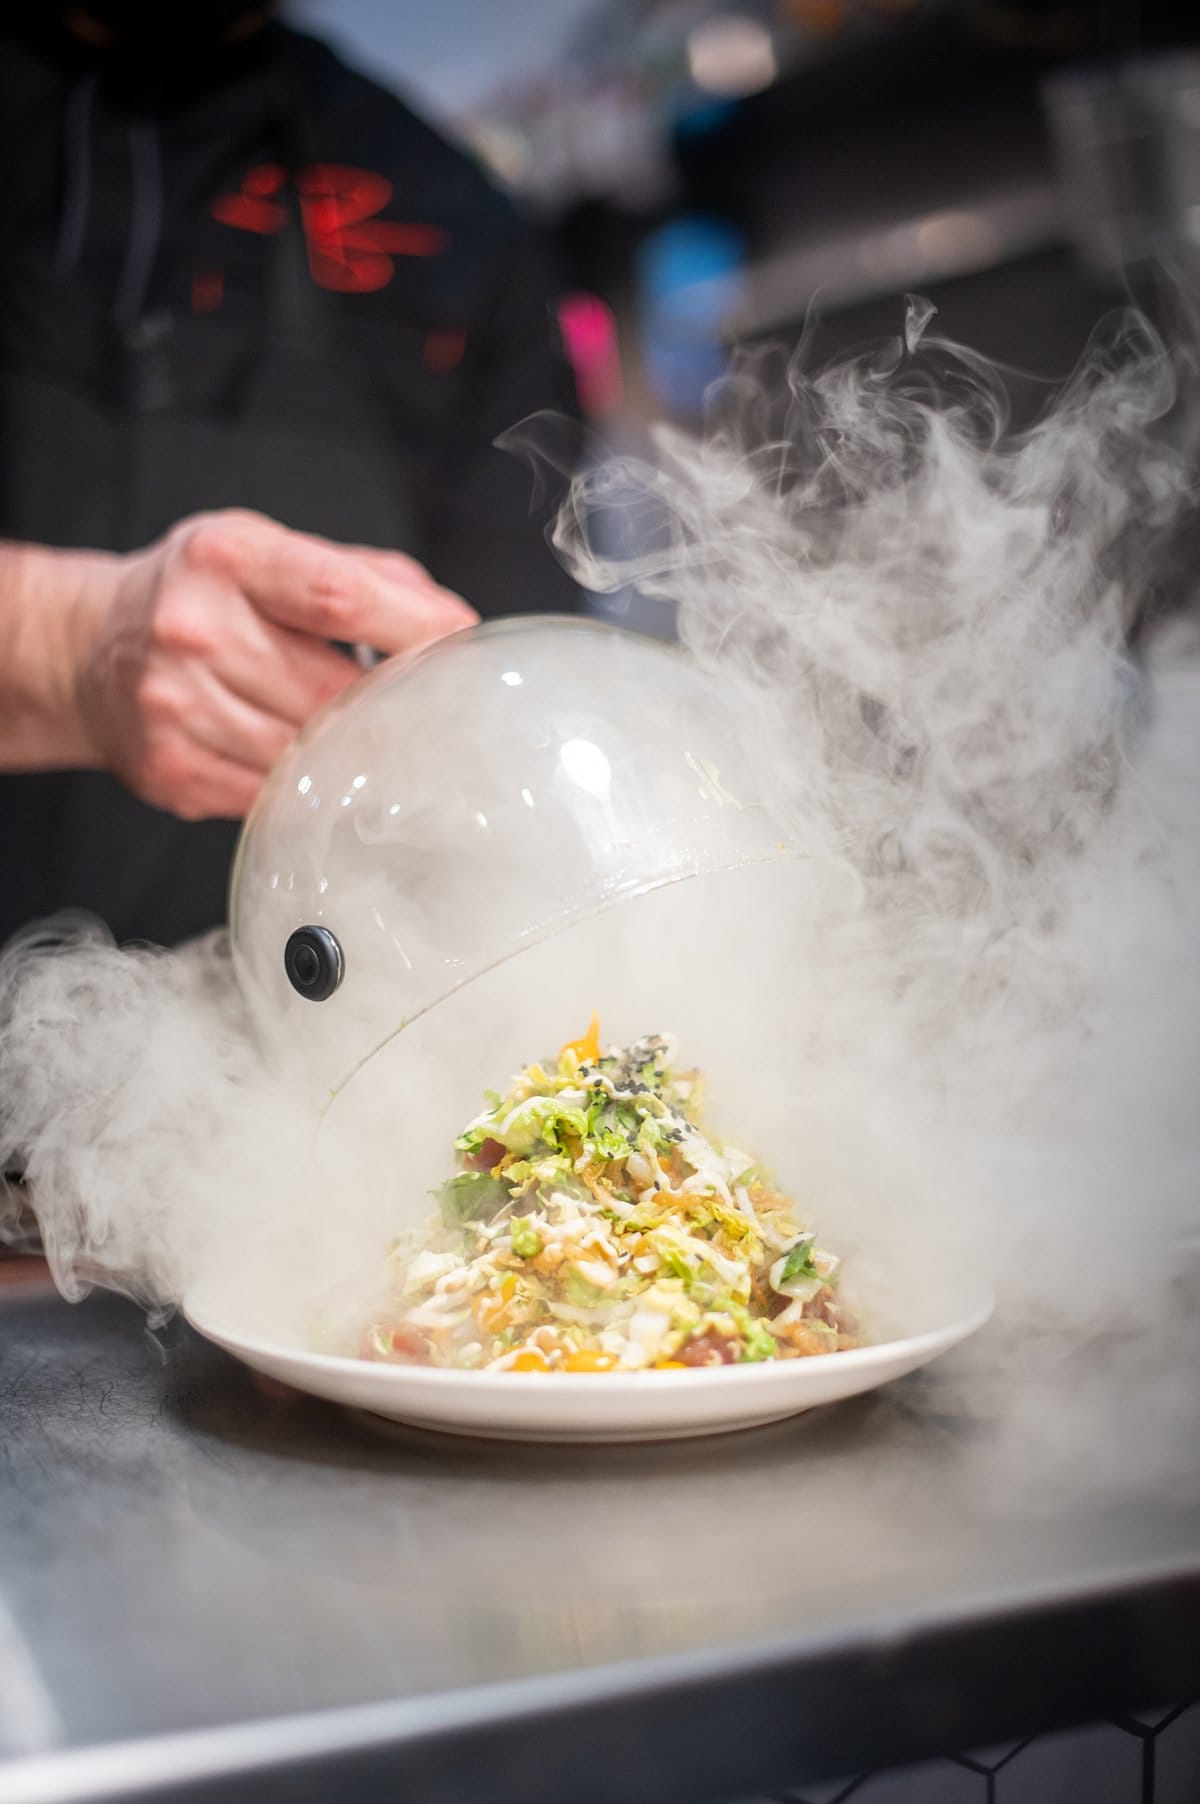 Cloche lifting off a napa cabbage salad with infused smoke.